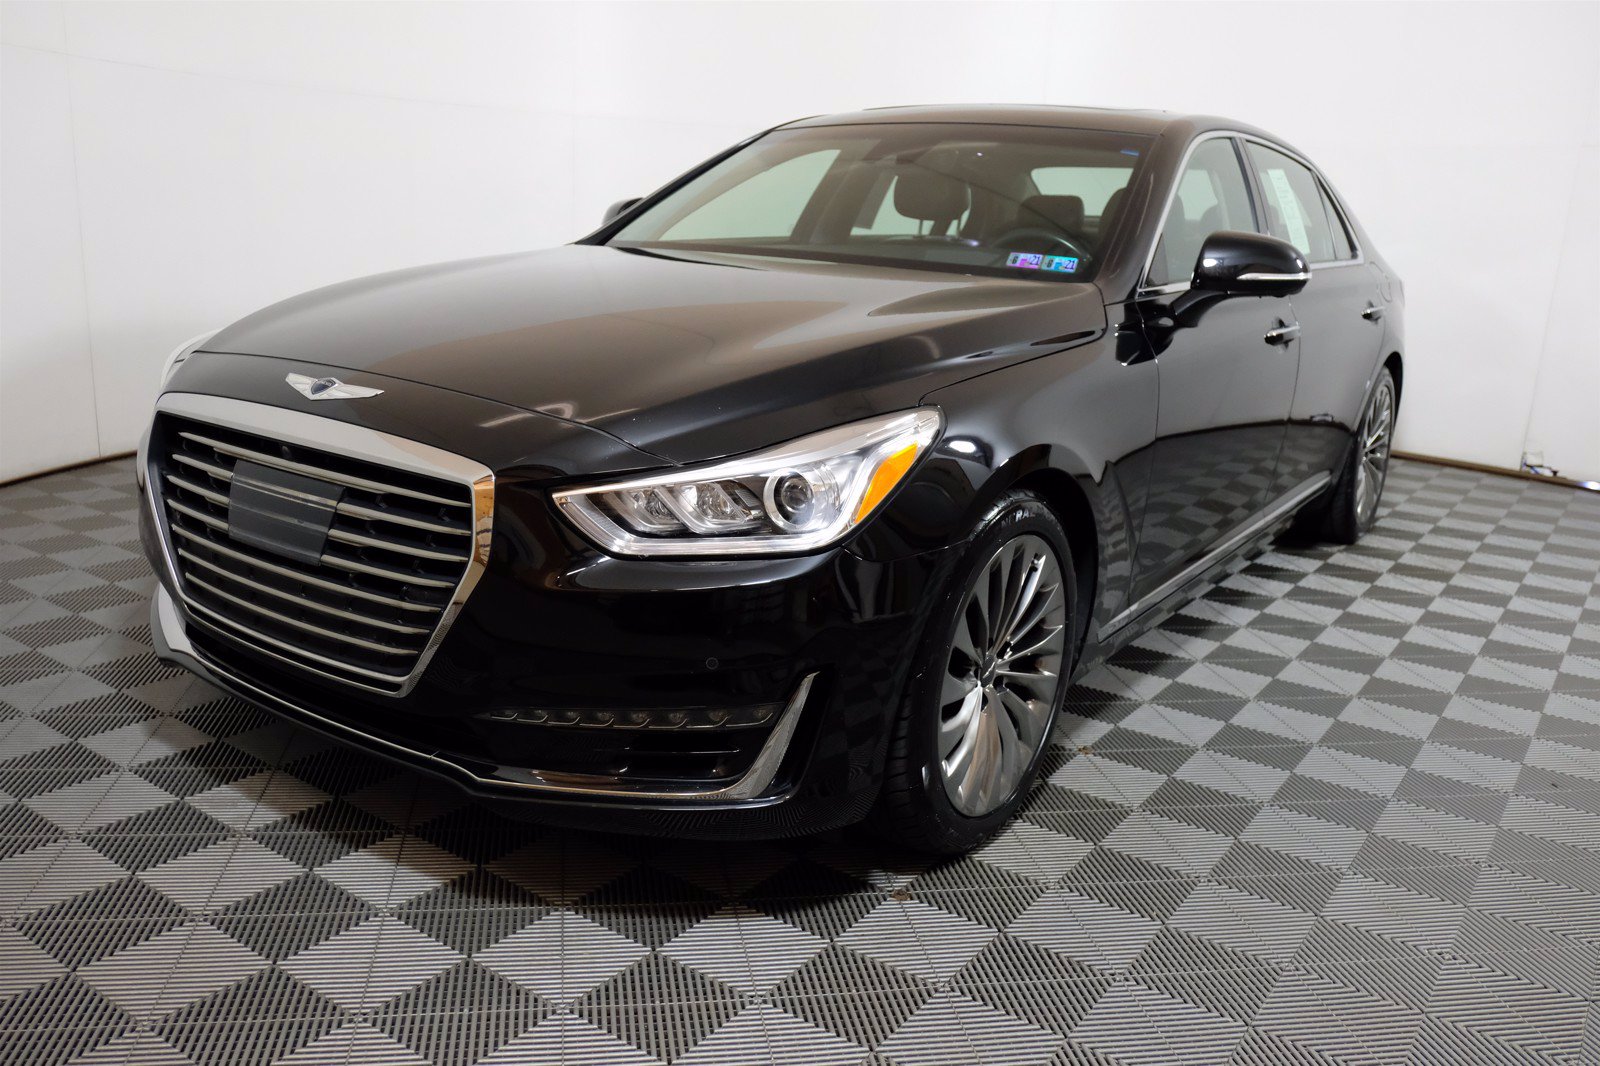 PreOwned 2017 Genesis G90 5.0L Ultimate All Wheel Drive